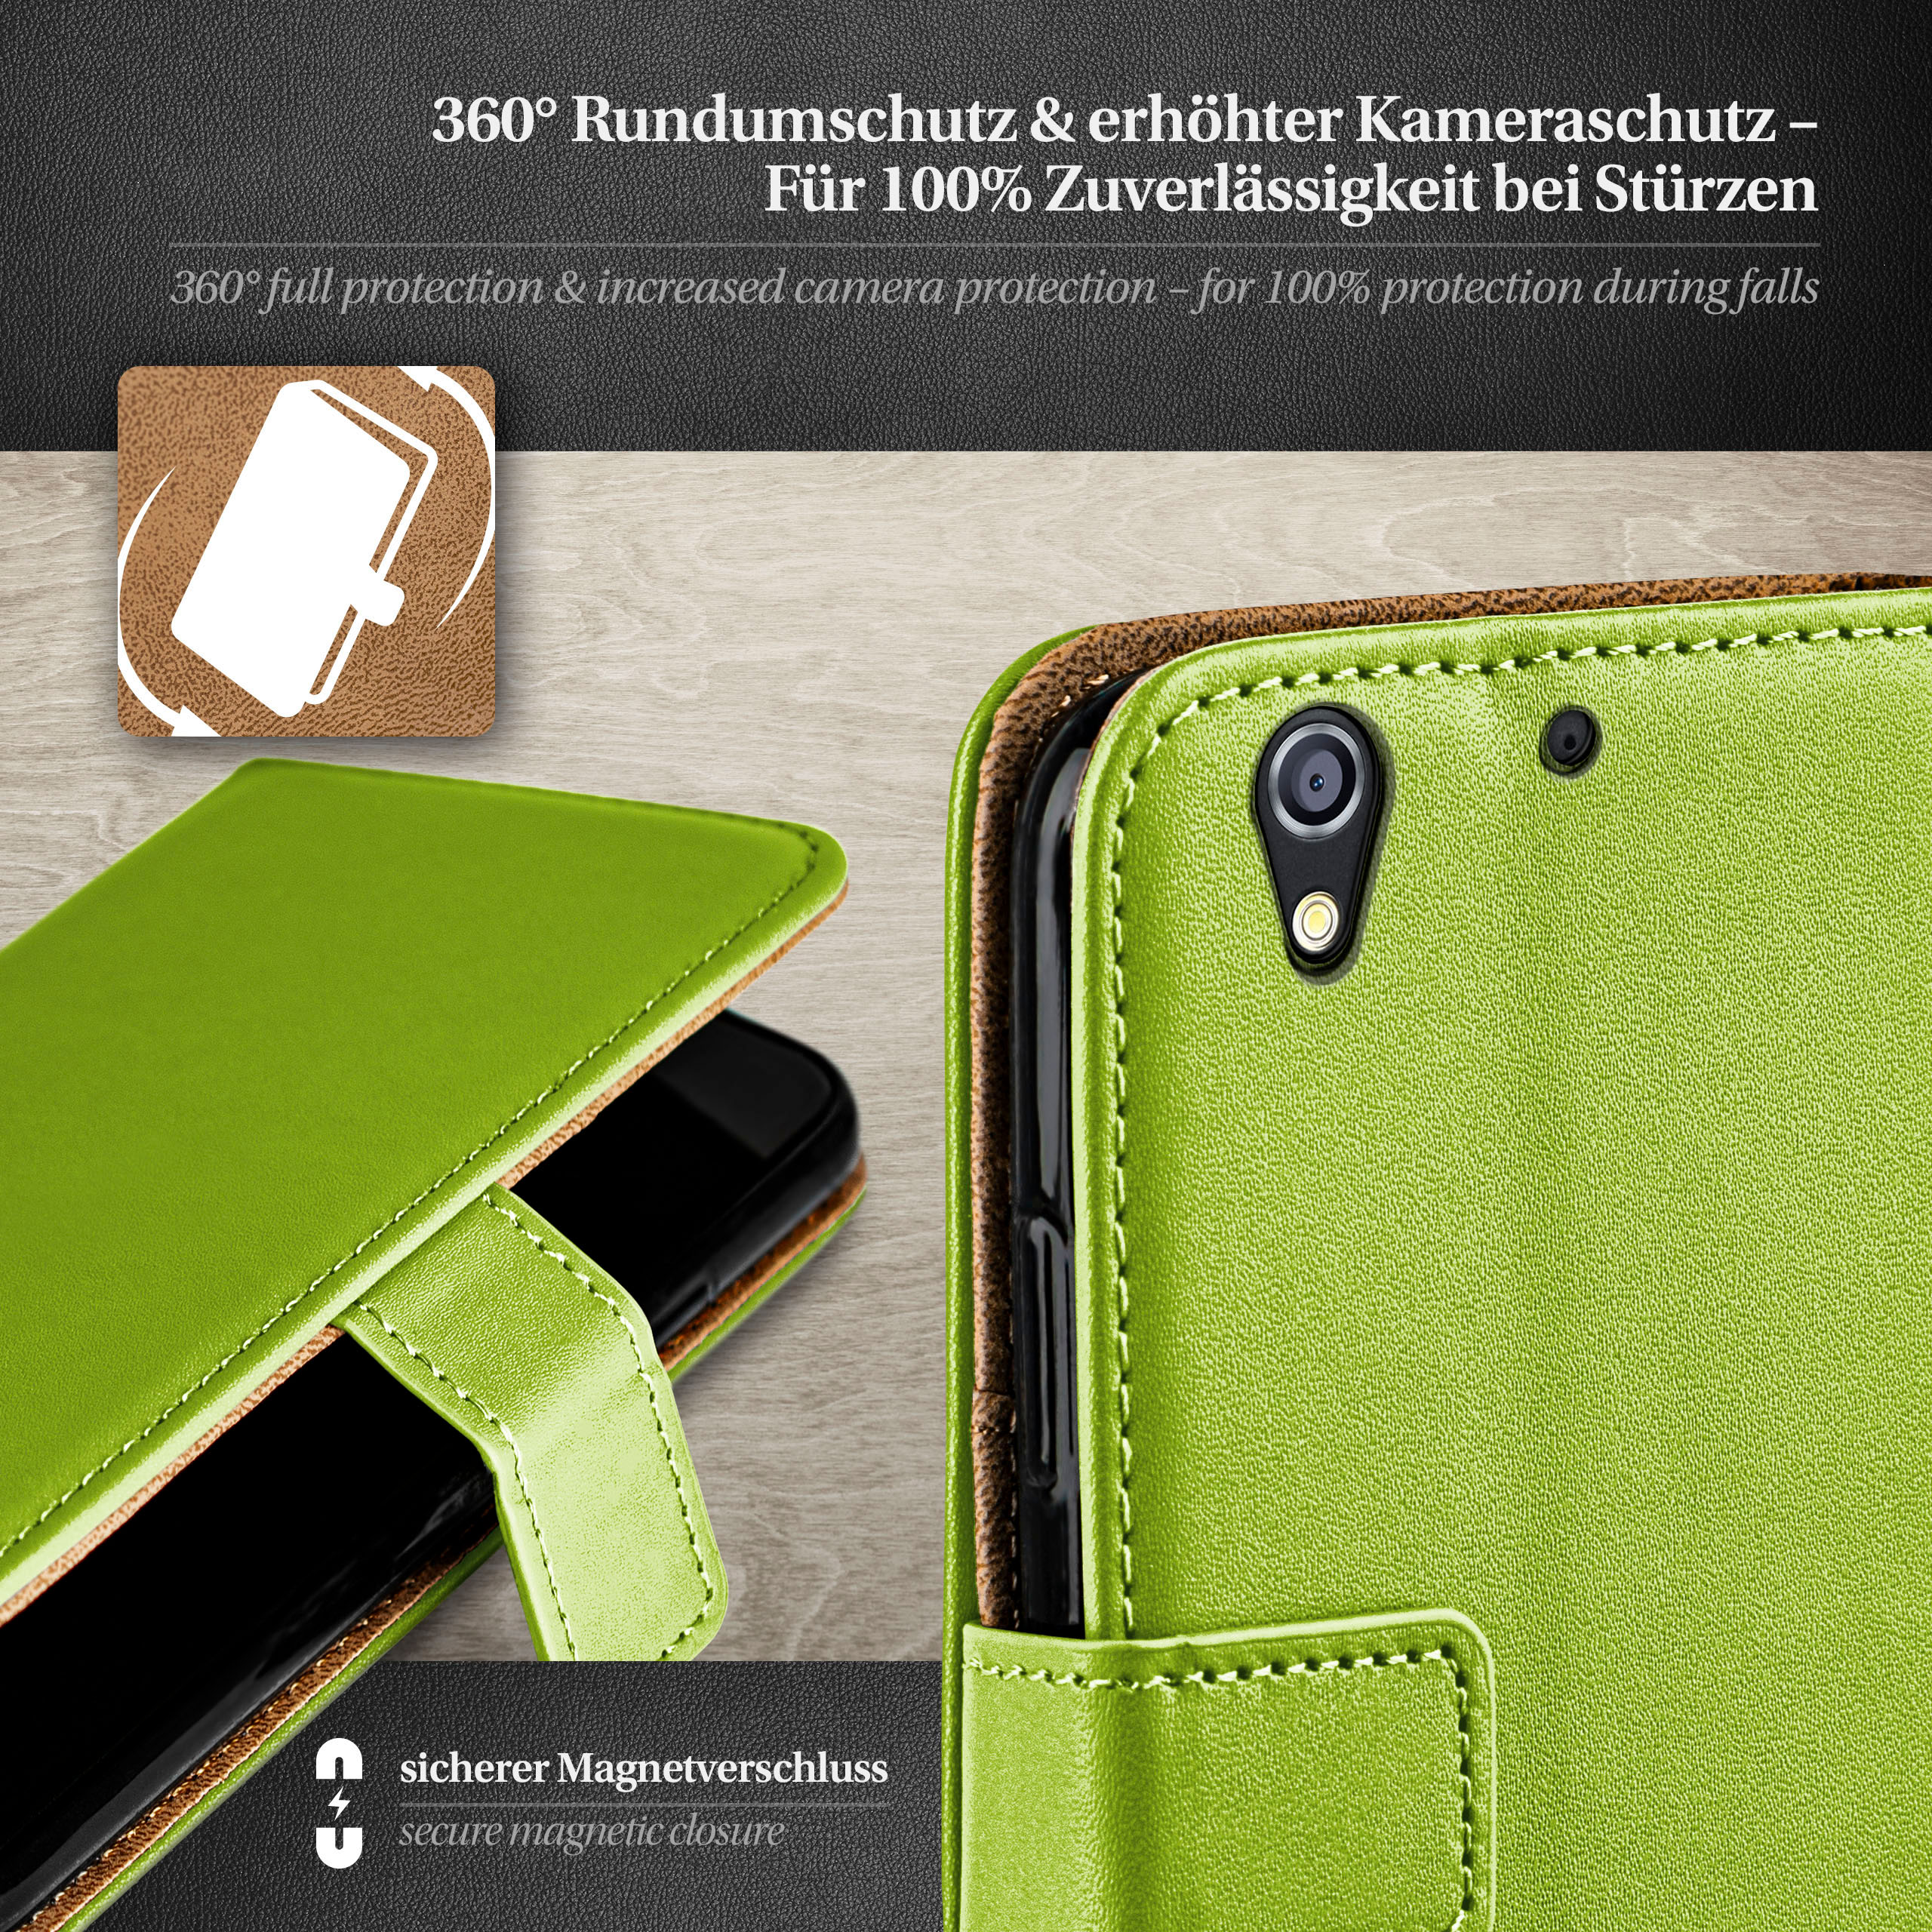 MOEX Book Case, Bookcover, Desire 626G, Lime-Green HTC